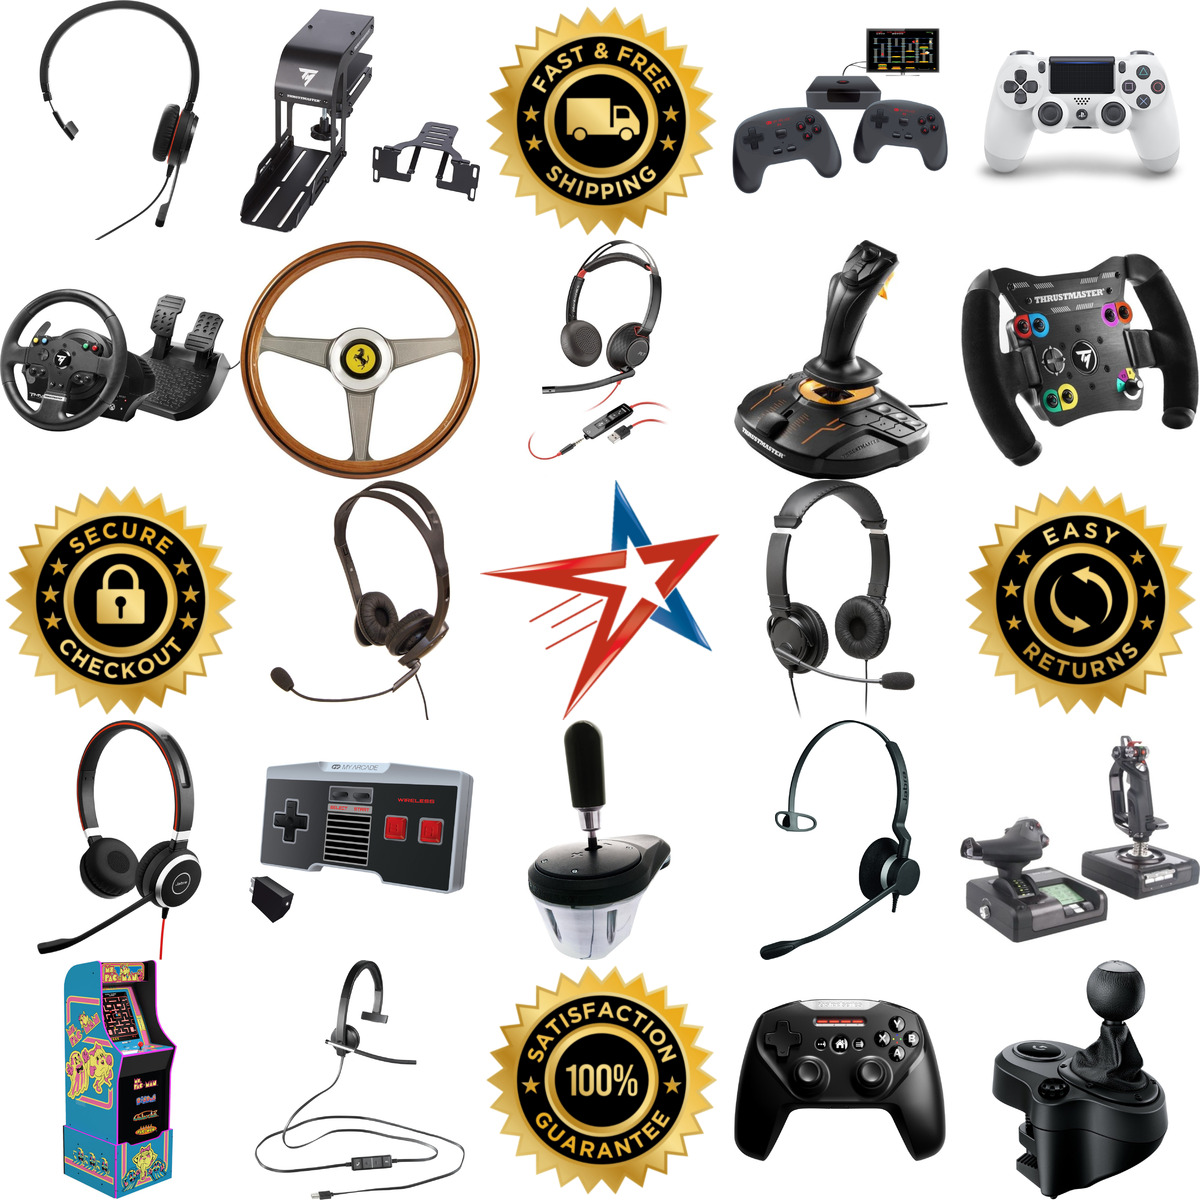 A selection of Gaming products on GoVets